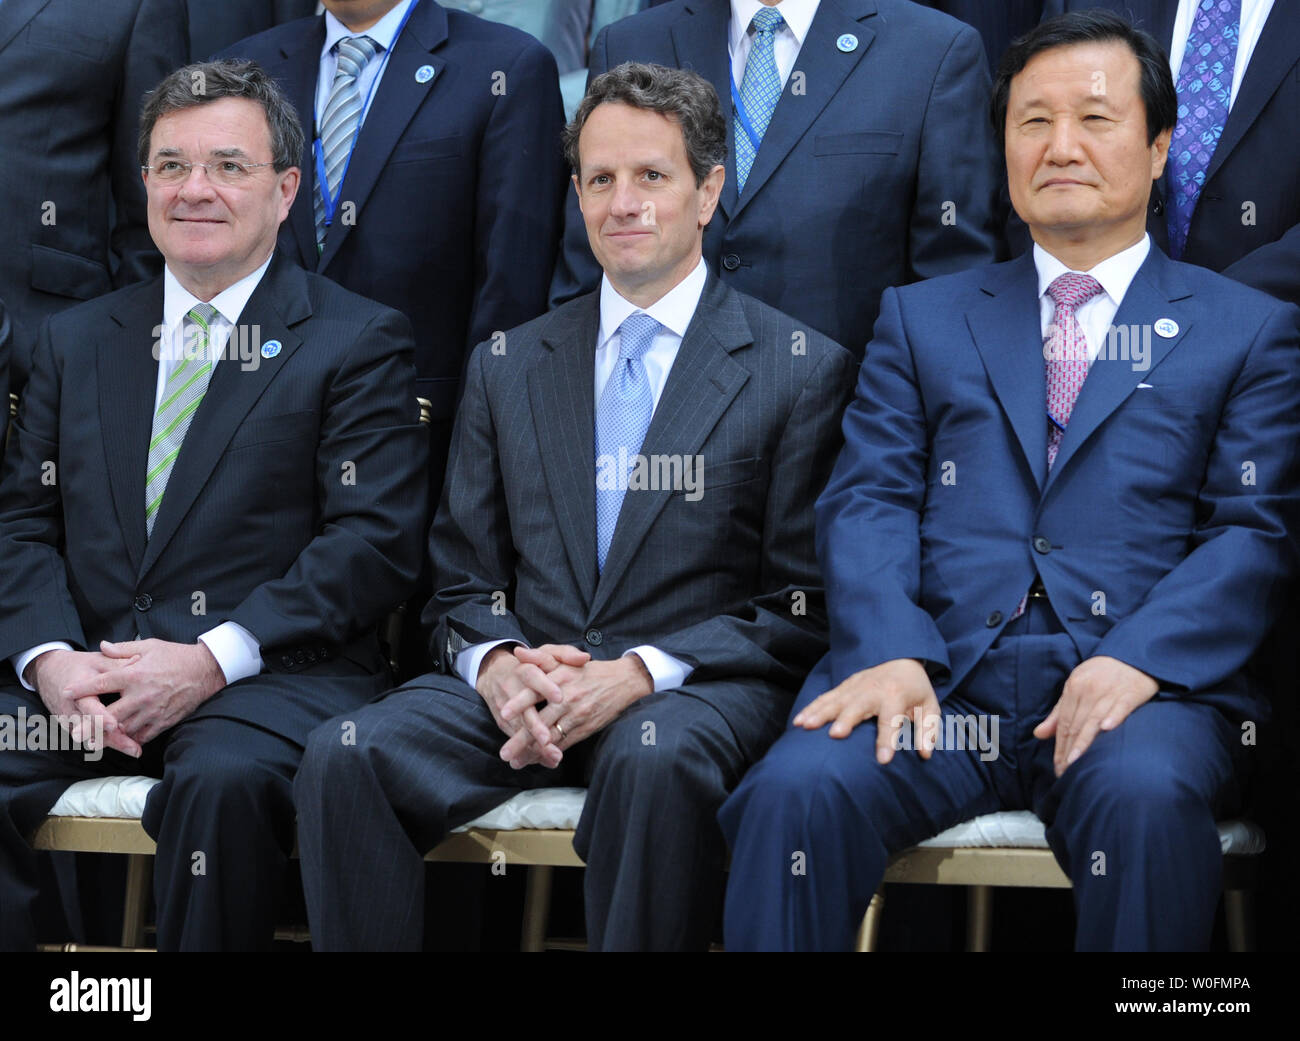 (L to R) Canada's Finance Minister Jim Flaherty, U.S. Treasury Secretary Tim Geithner and Jeung-Hyun Yoon, governor of the Bank of Korea, gather for the International Monetary and Financial Committee group photo during the IMF and World Bank Spring Meetings in Washington on April 24, 2010.  UPI/Alexis C. Glenn Stock Photo